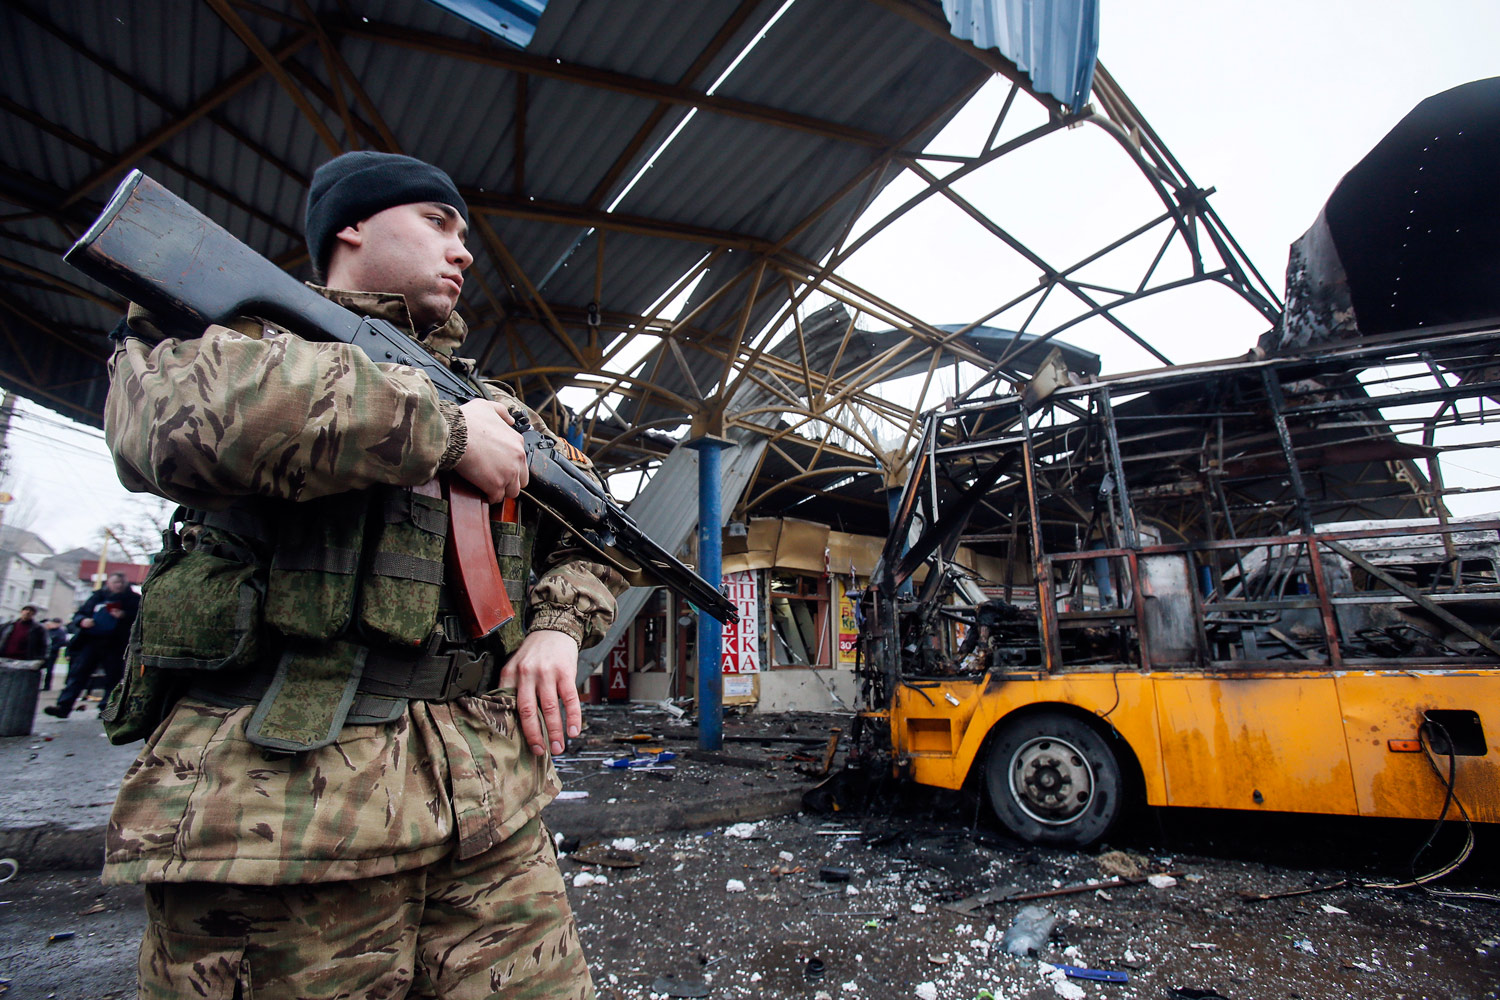 Why Arming the Ukrainian Government Would Be Disastrous